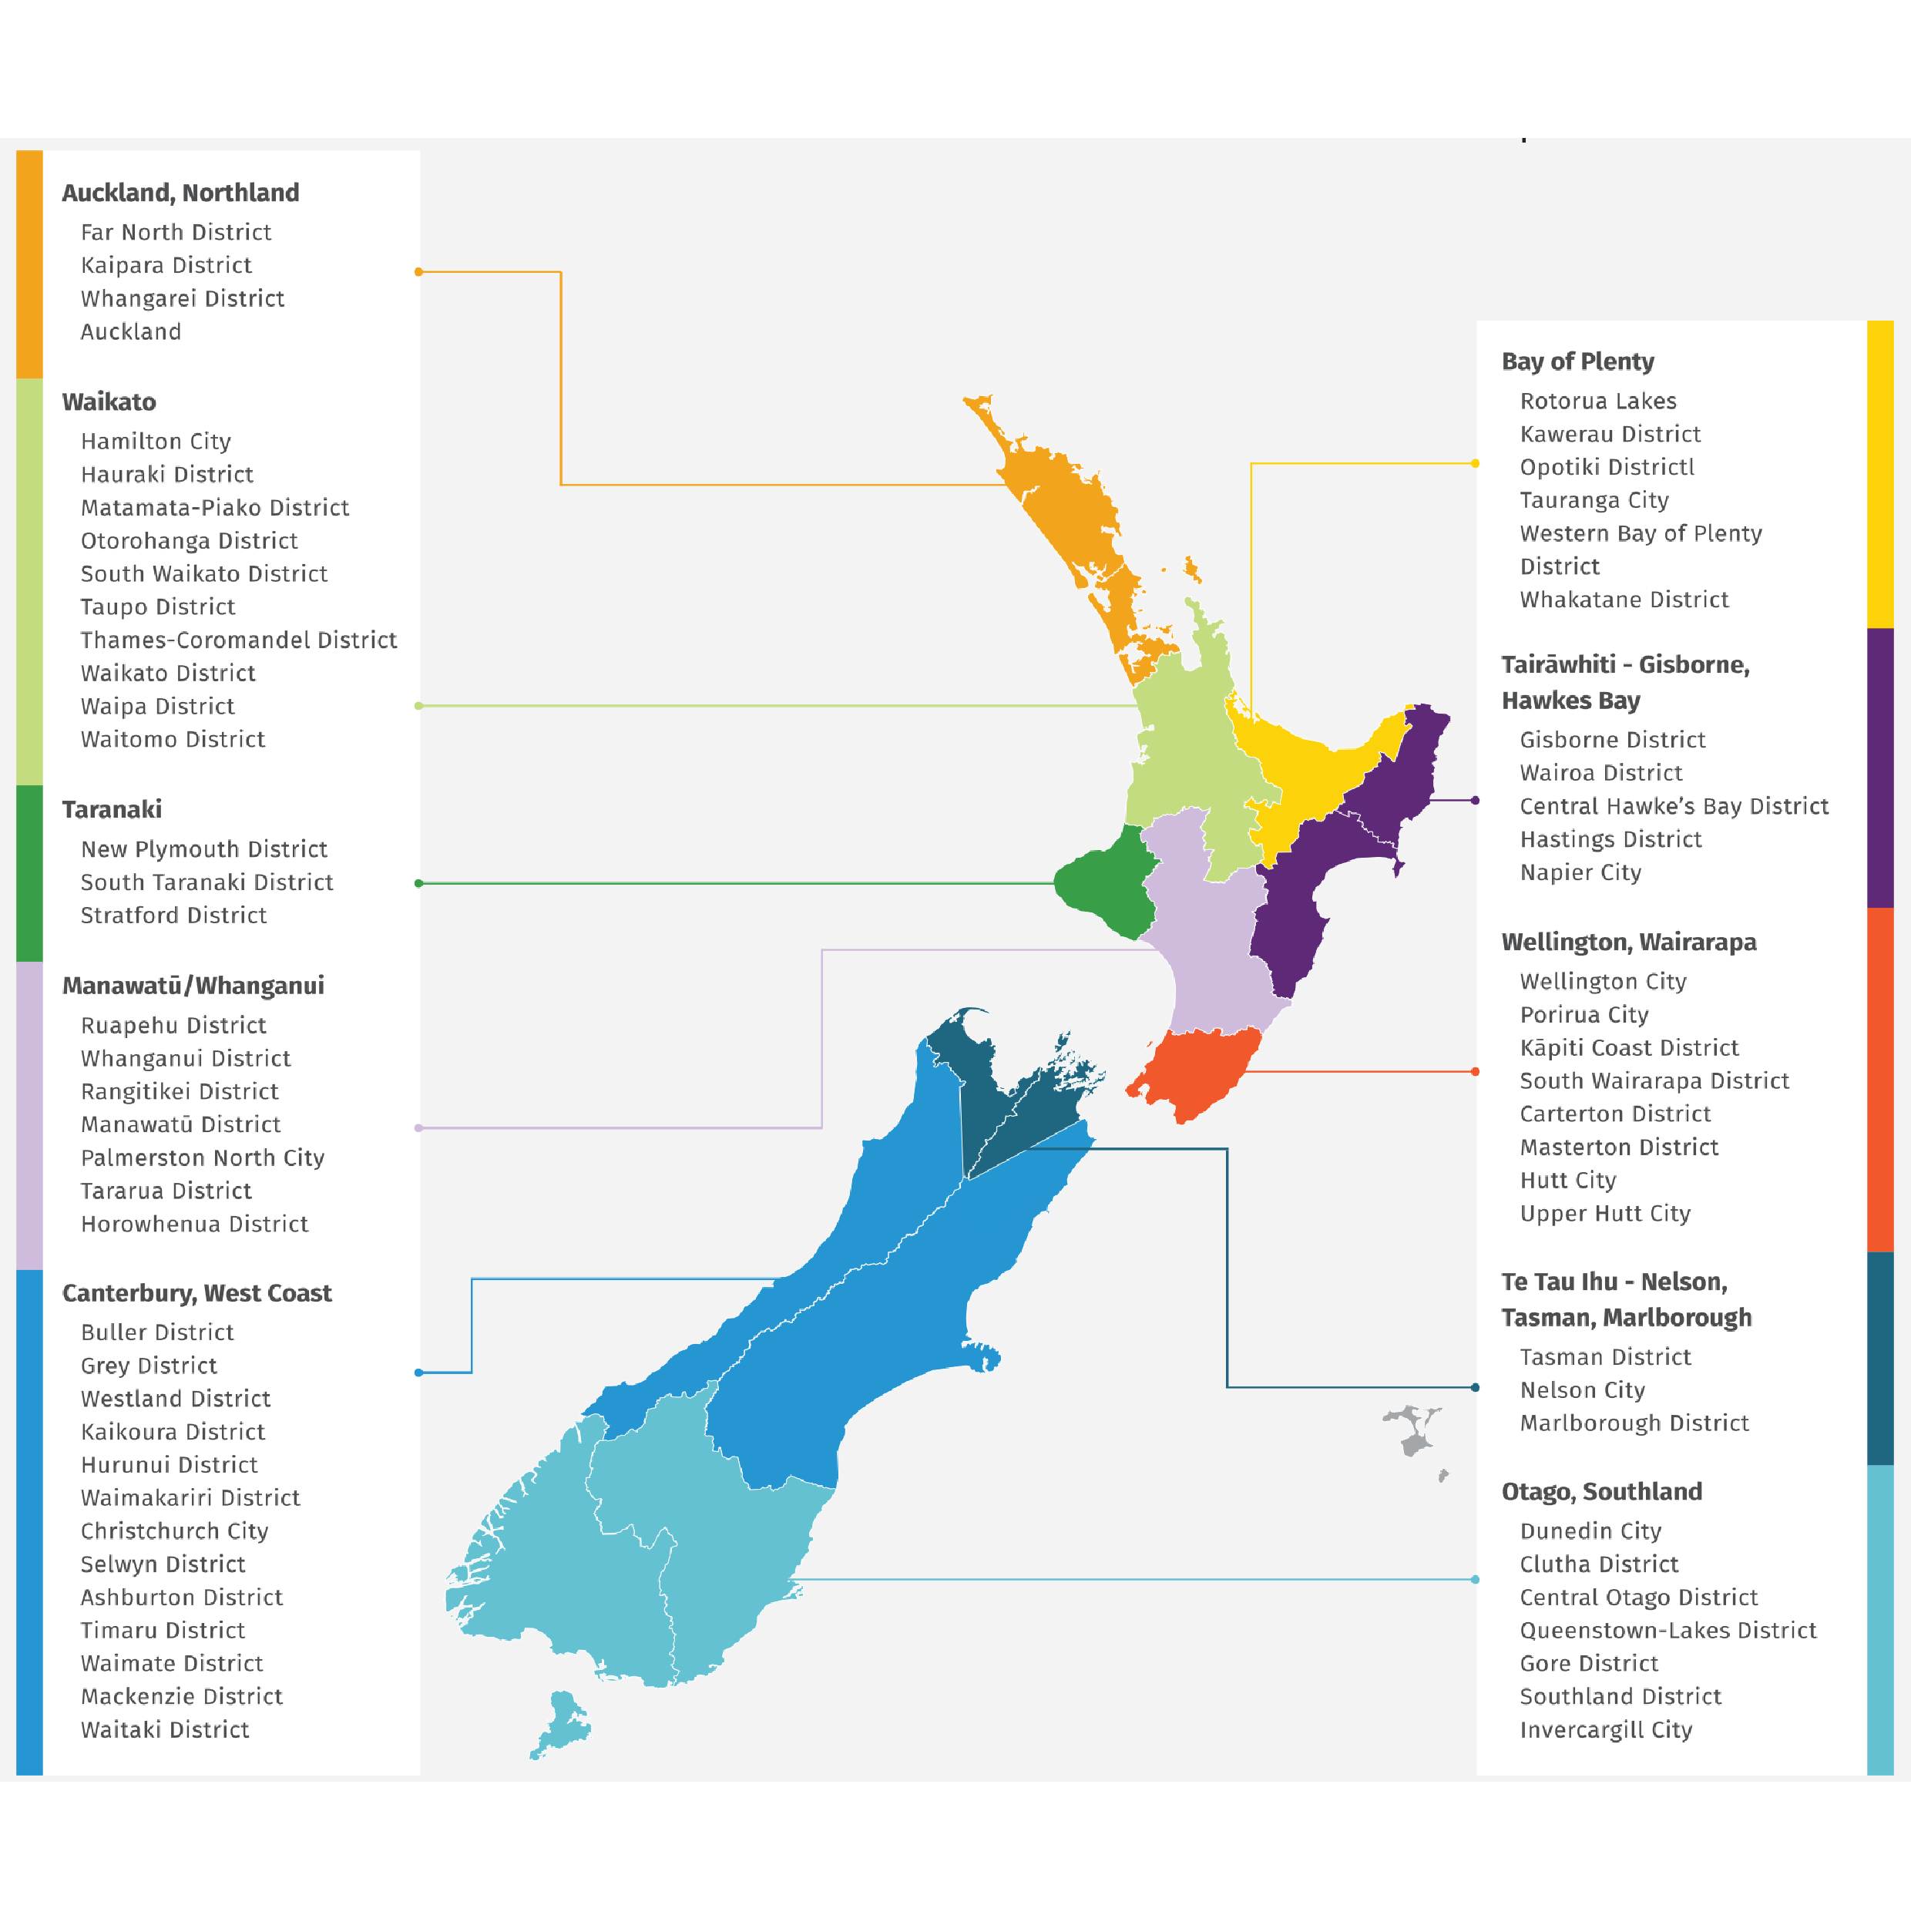 https://www.westernbay.govt.nz/repository/libraries/id:25p4fe6mo17q9stw0v5w/hierarchy/council/projects/three-waters/Affordable%20Water%20Reform%20map.JPG